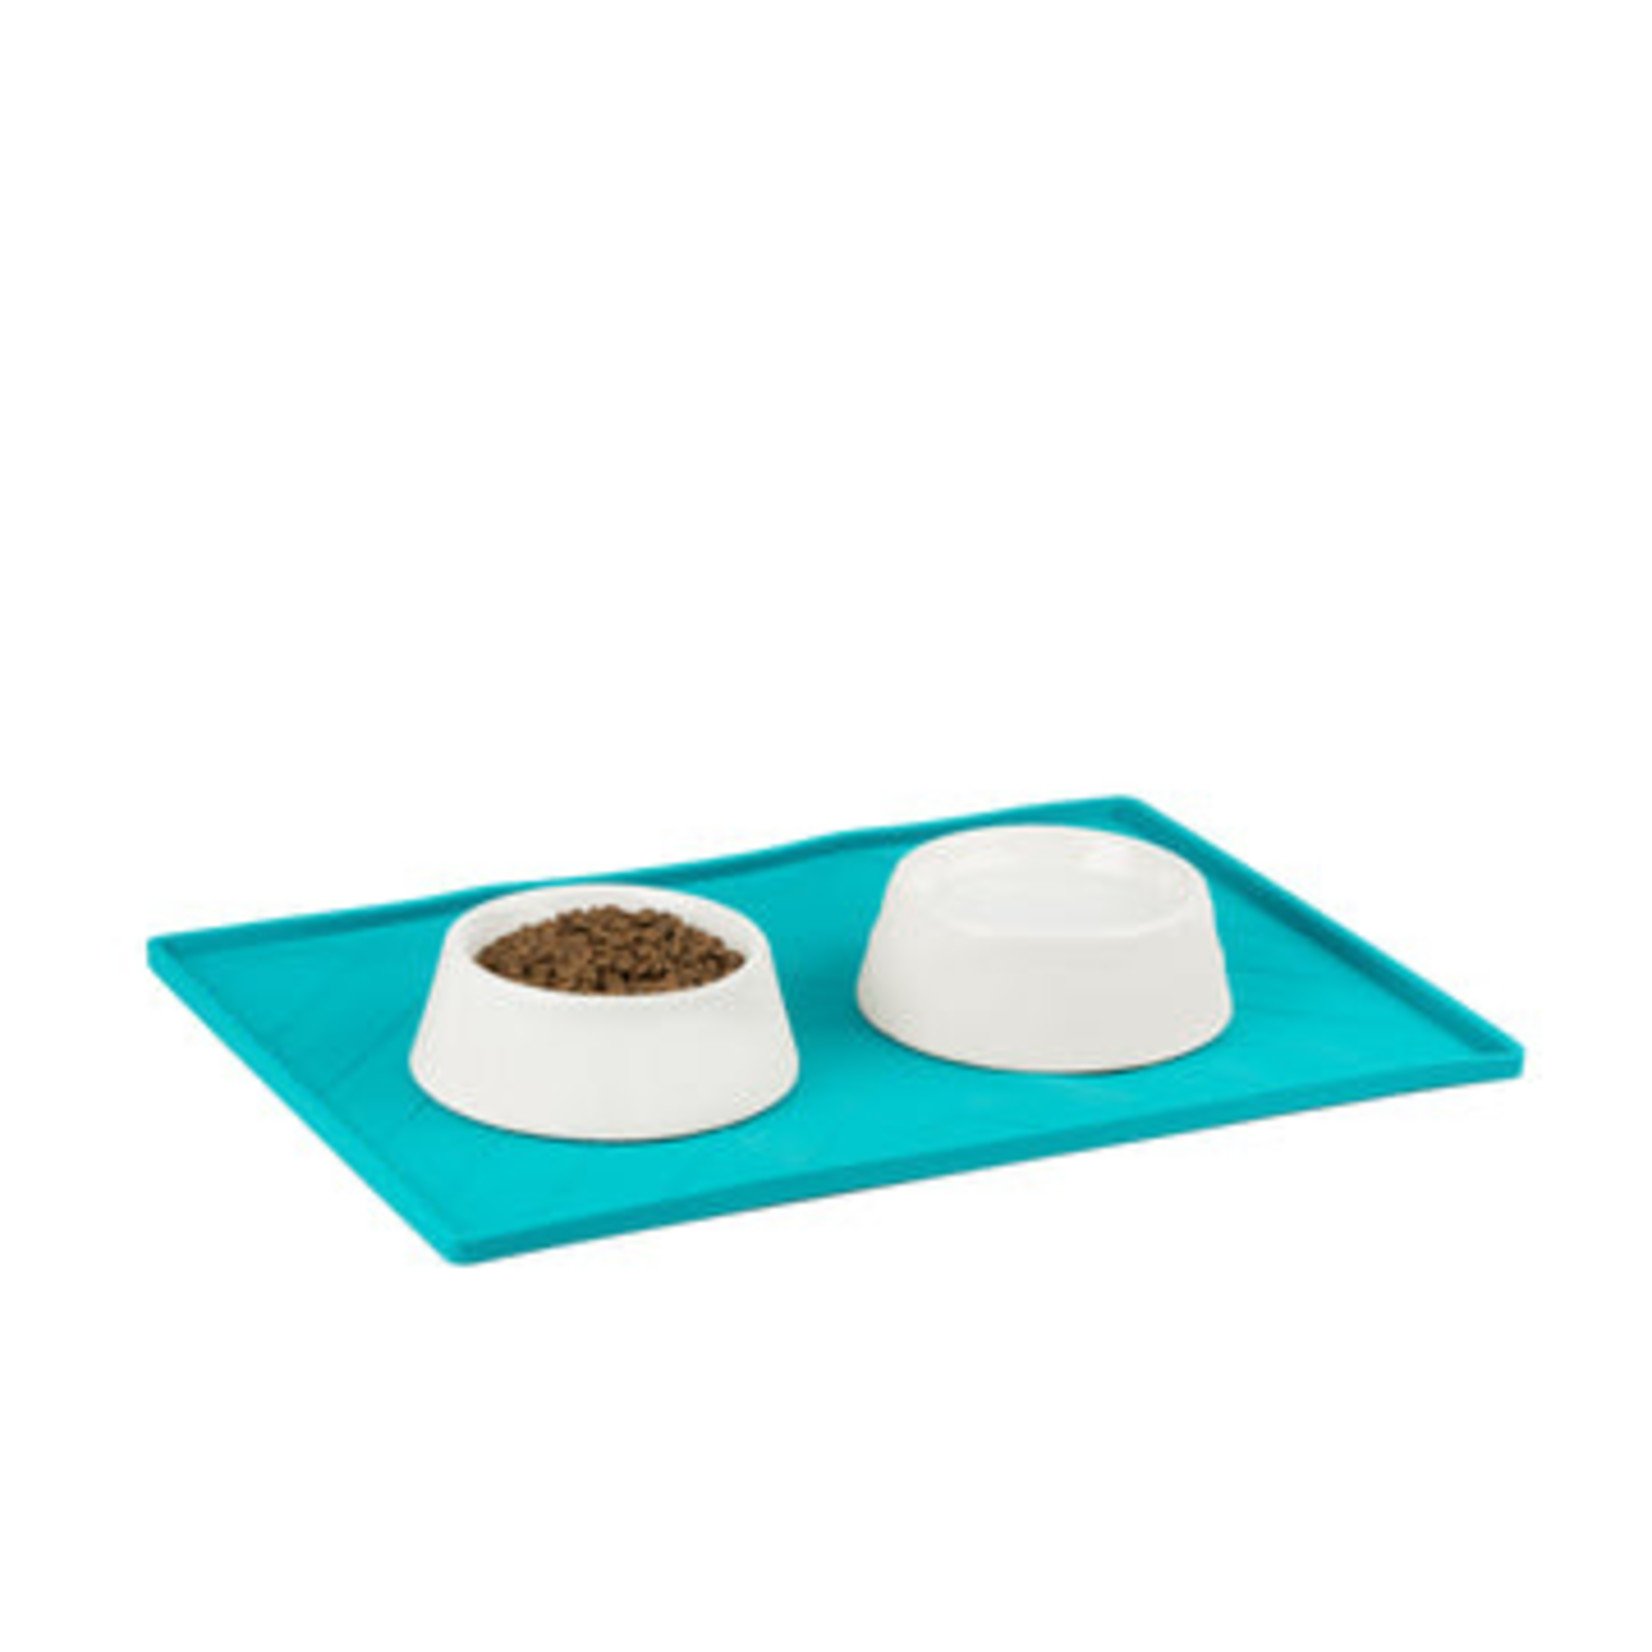 Messy Mutts Messy Mutts Non-Slip Silicone Food Bowl Mat